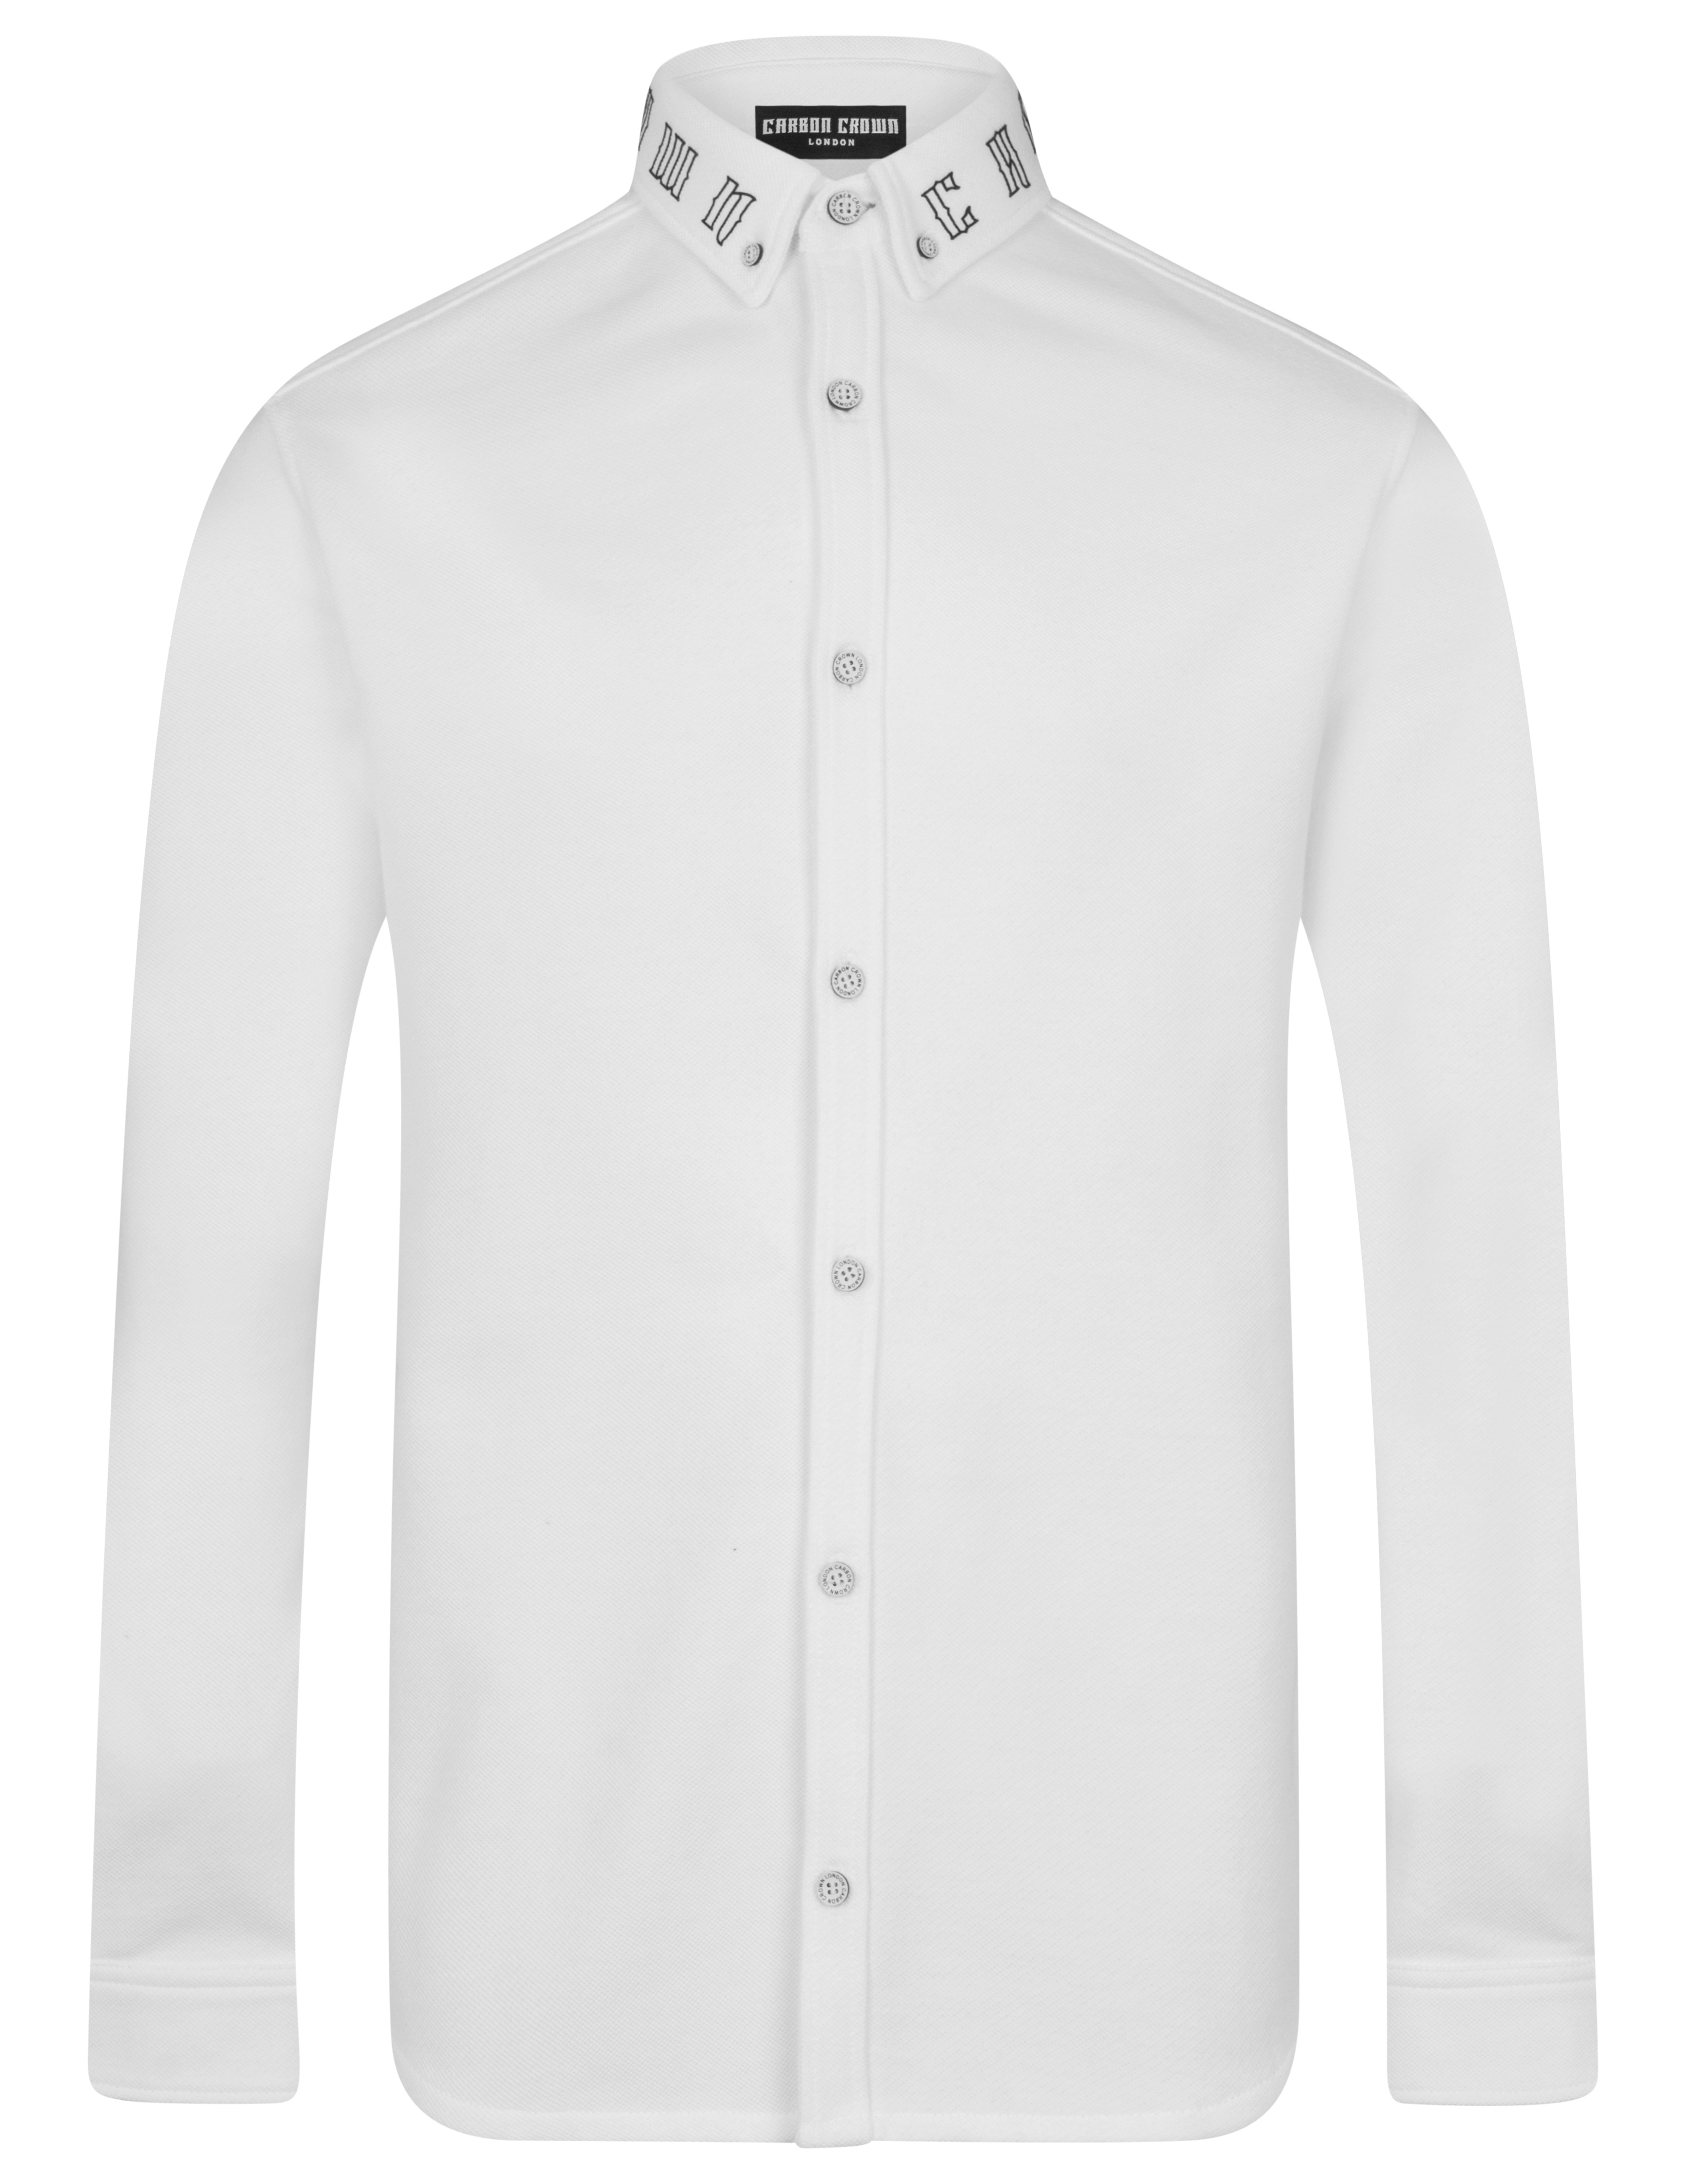 Long sleeve cotton pique white shirt – Branded collar – Carbon Crown